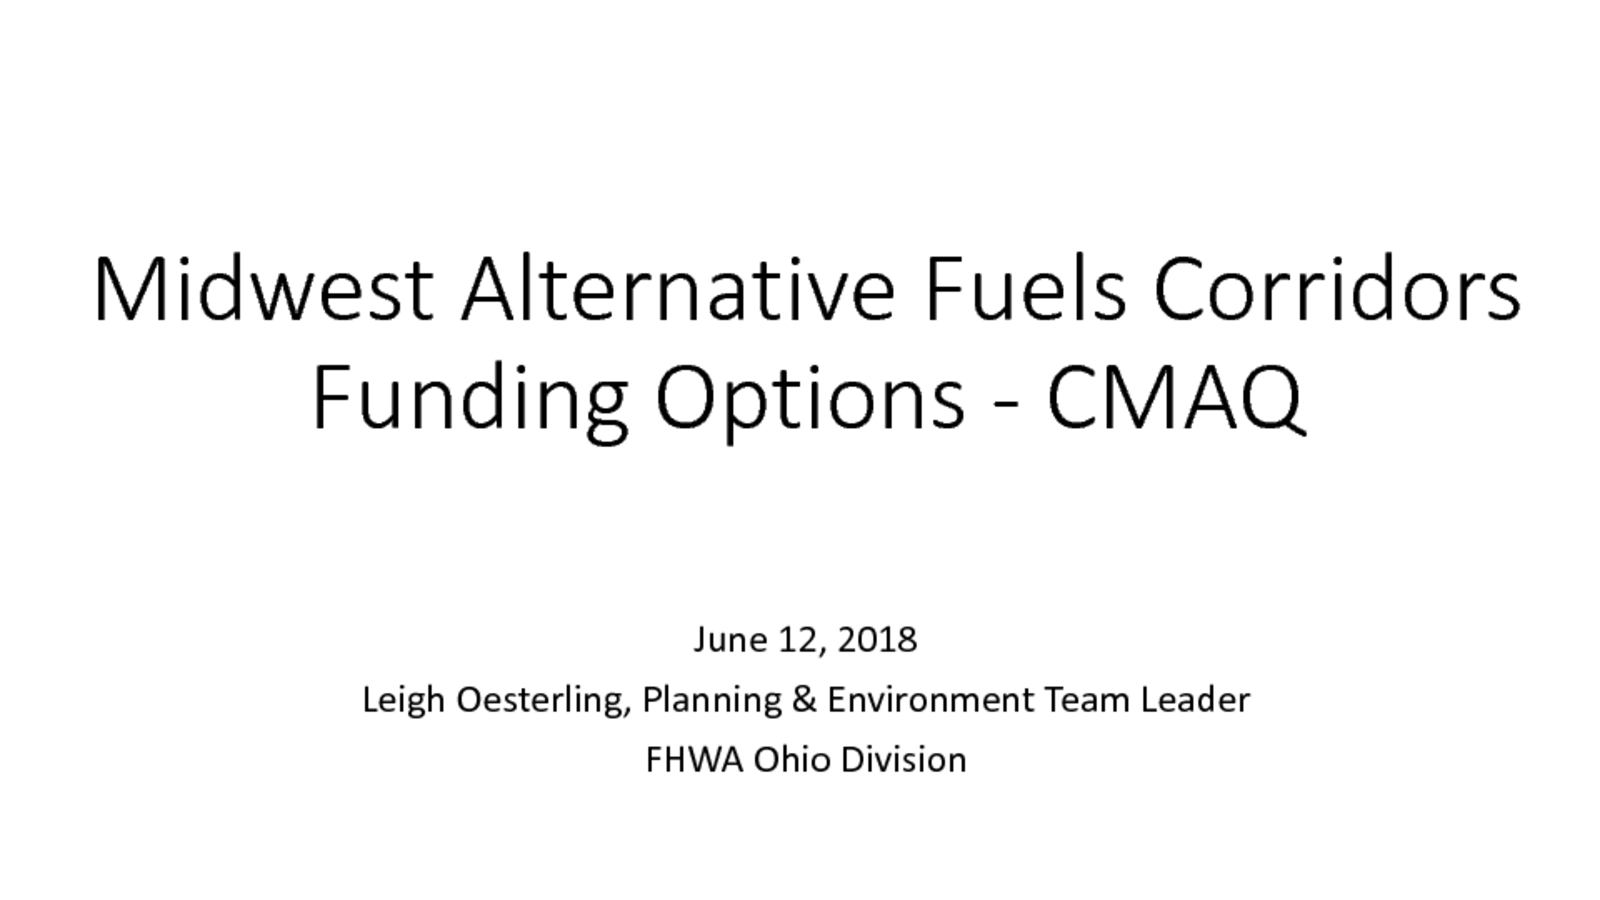 thumbnail of 2 – 2018 06 12 Midwest Alt Fuels Corridor_FHWA OH